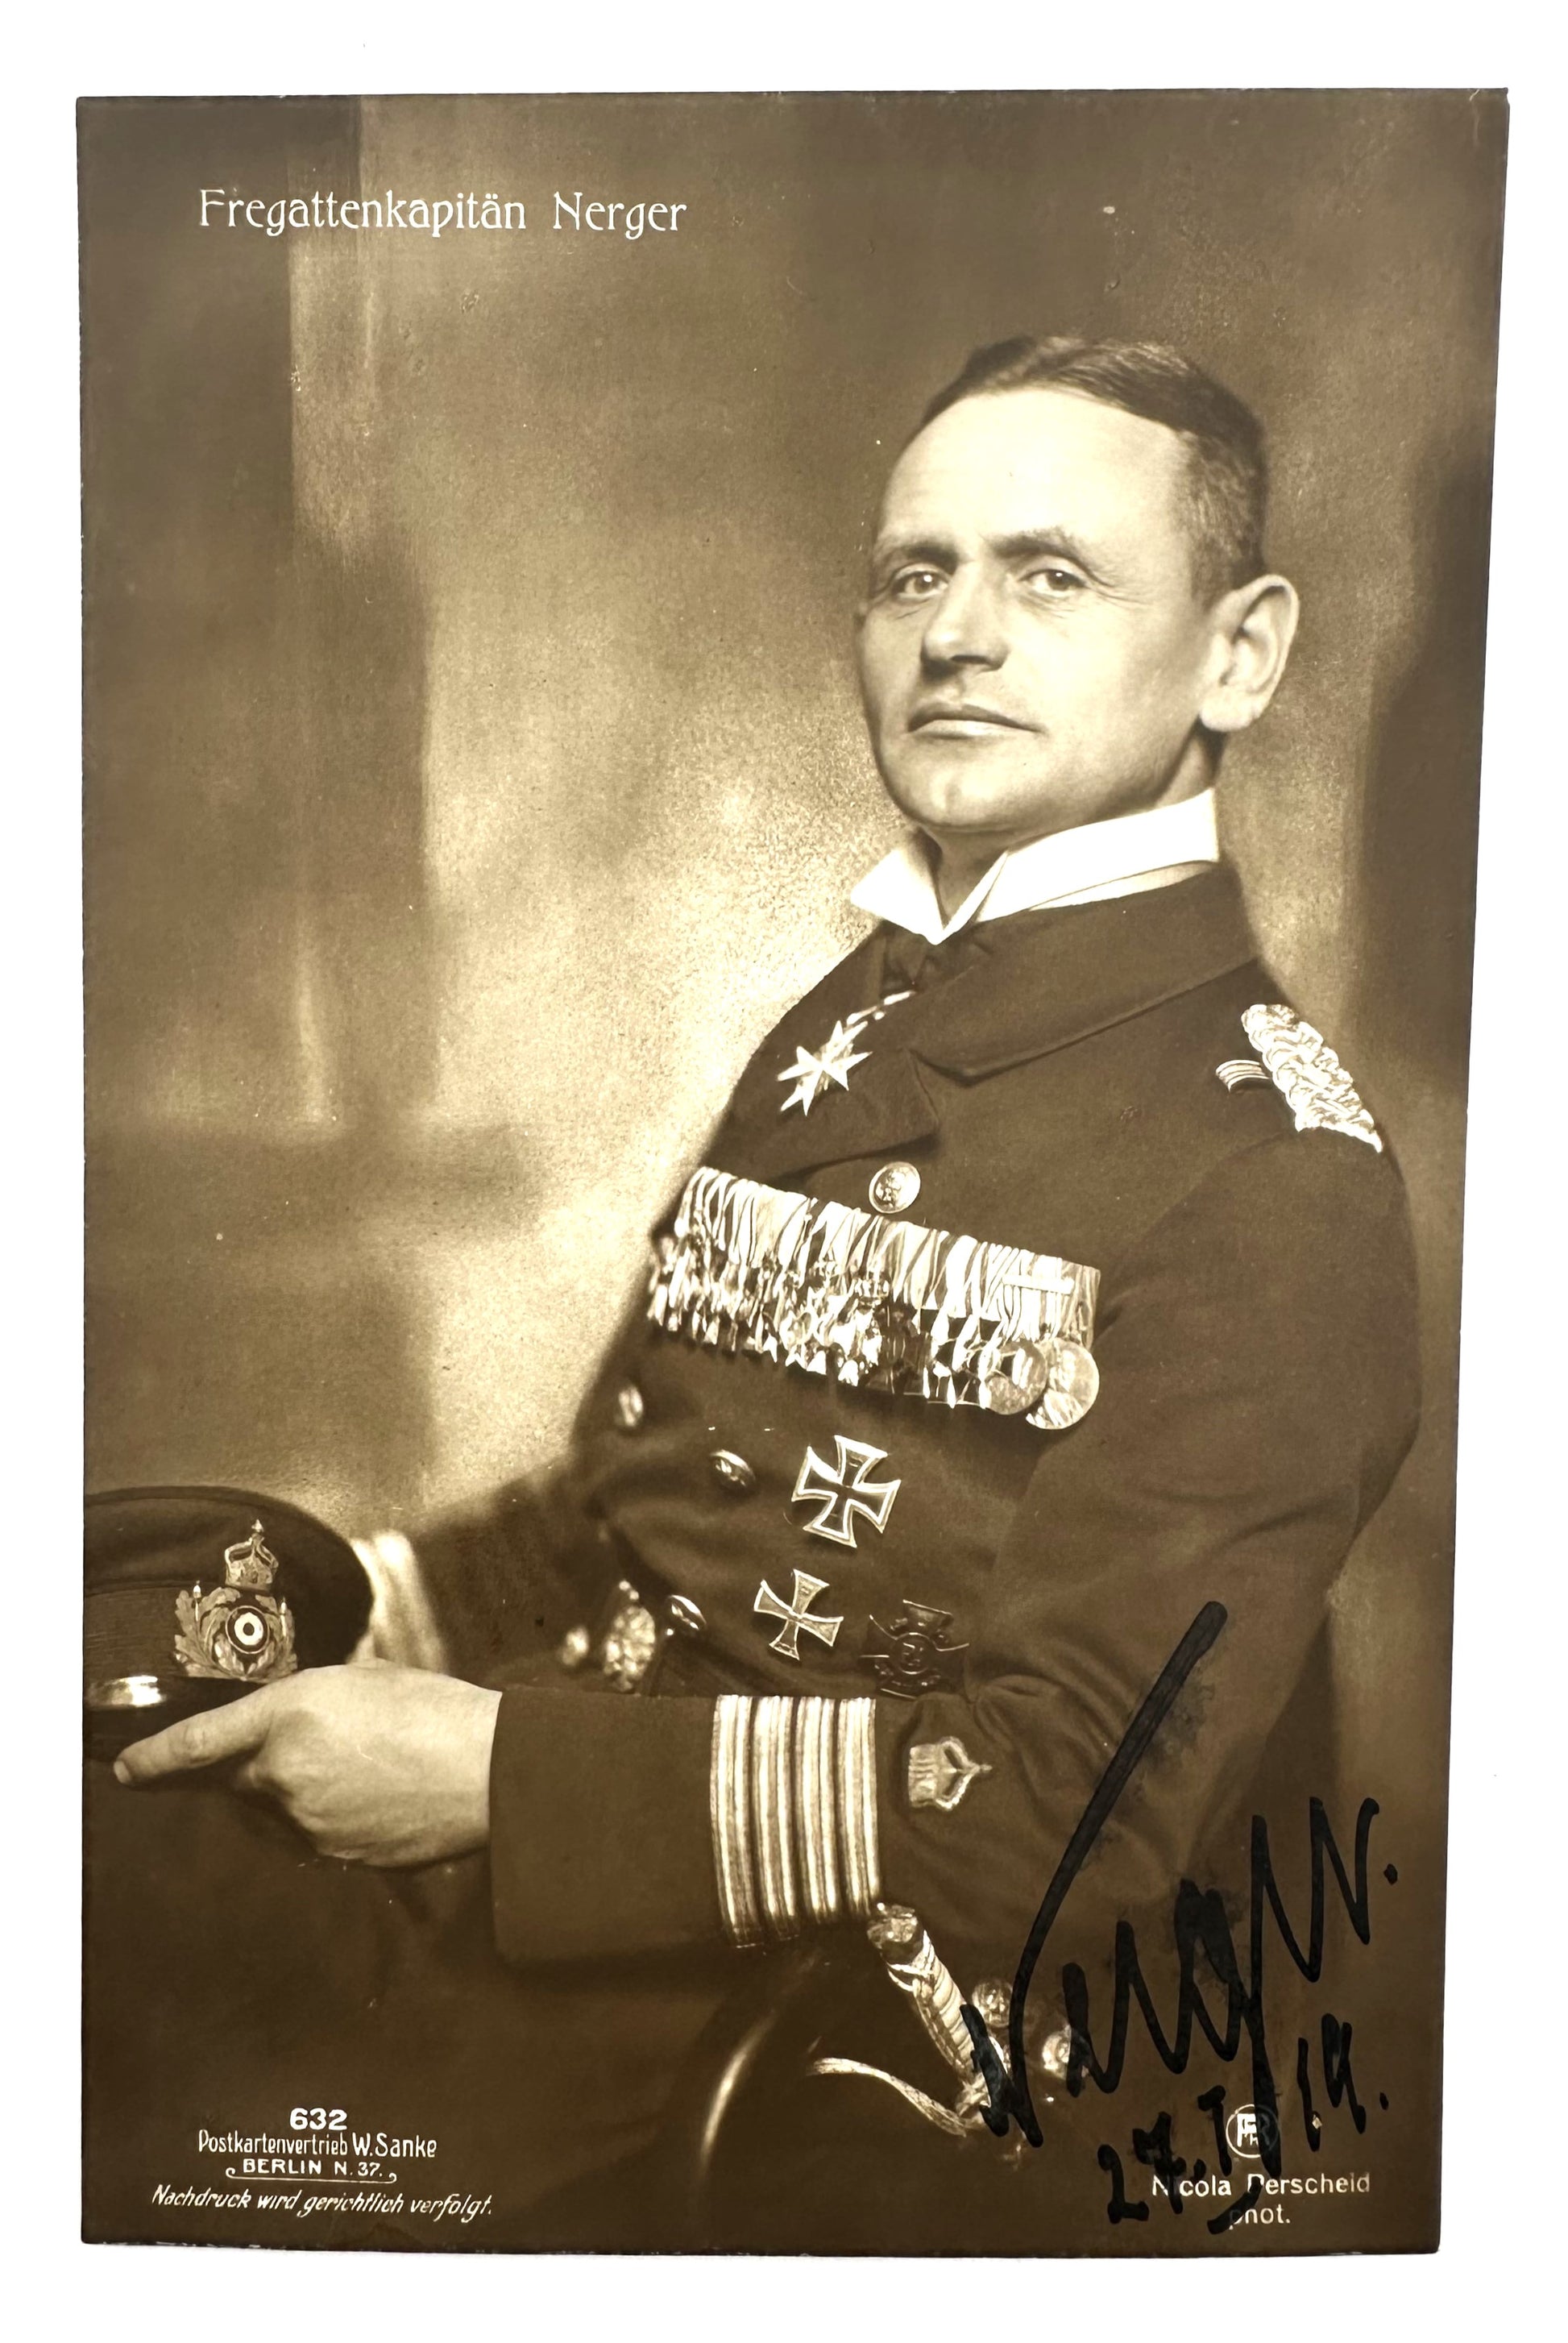 Autographed Postcard - Karl August Nerger - Derrittmeister Militaria Group